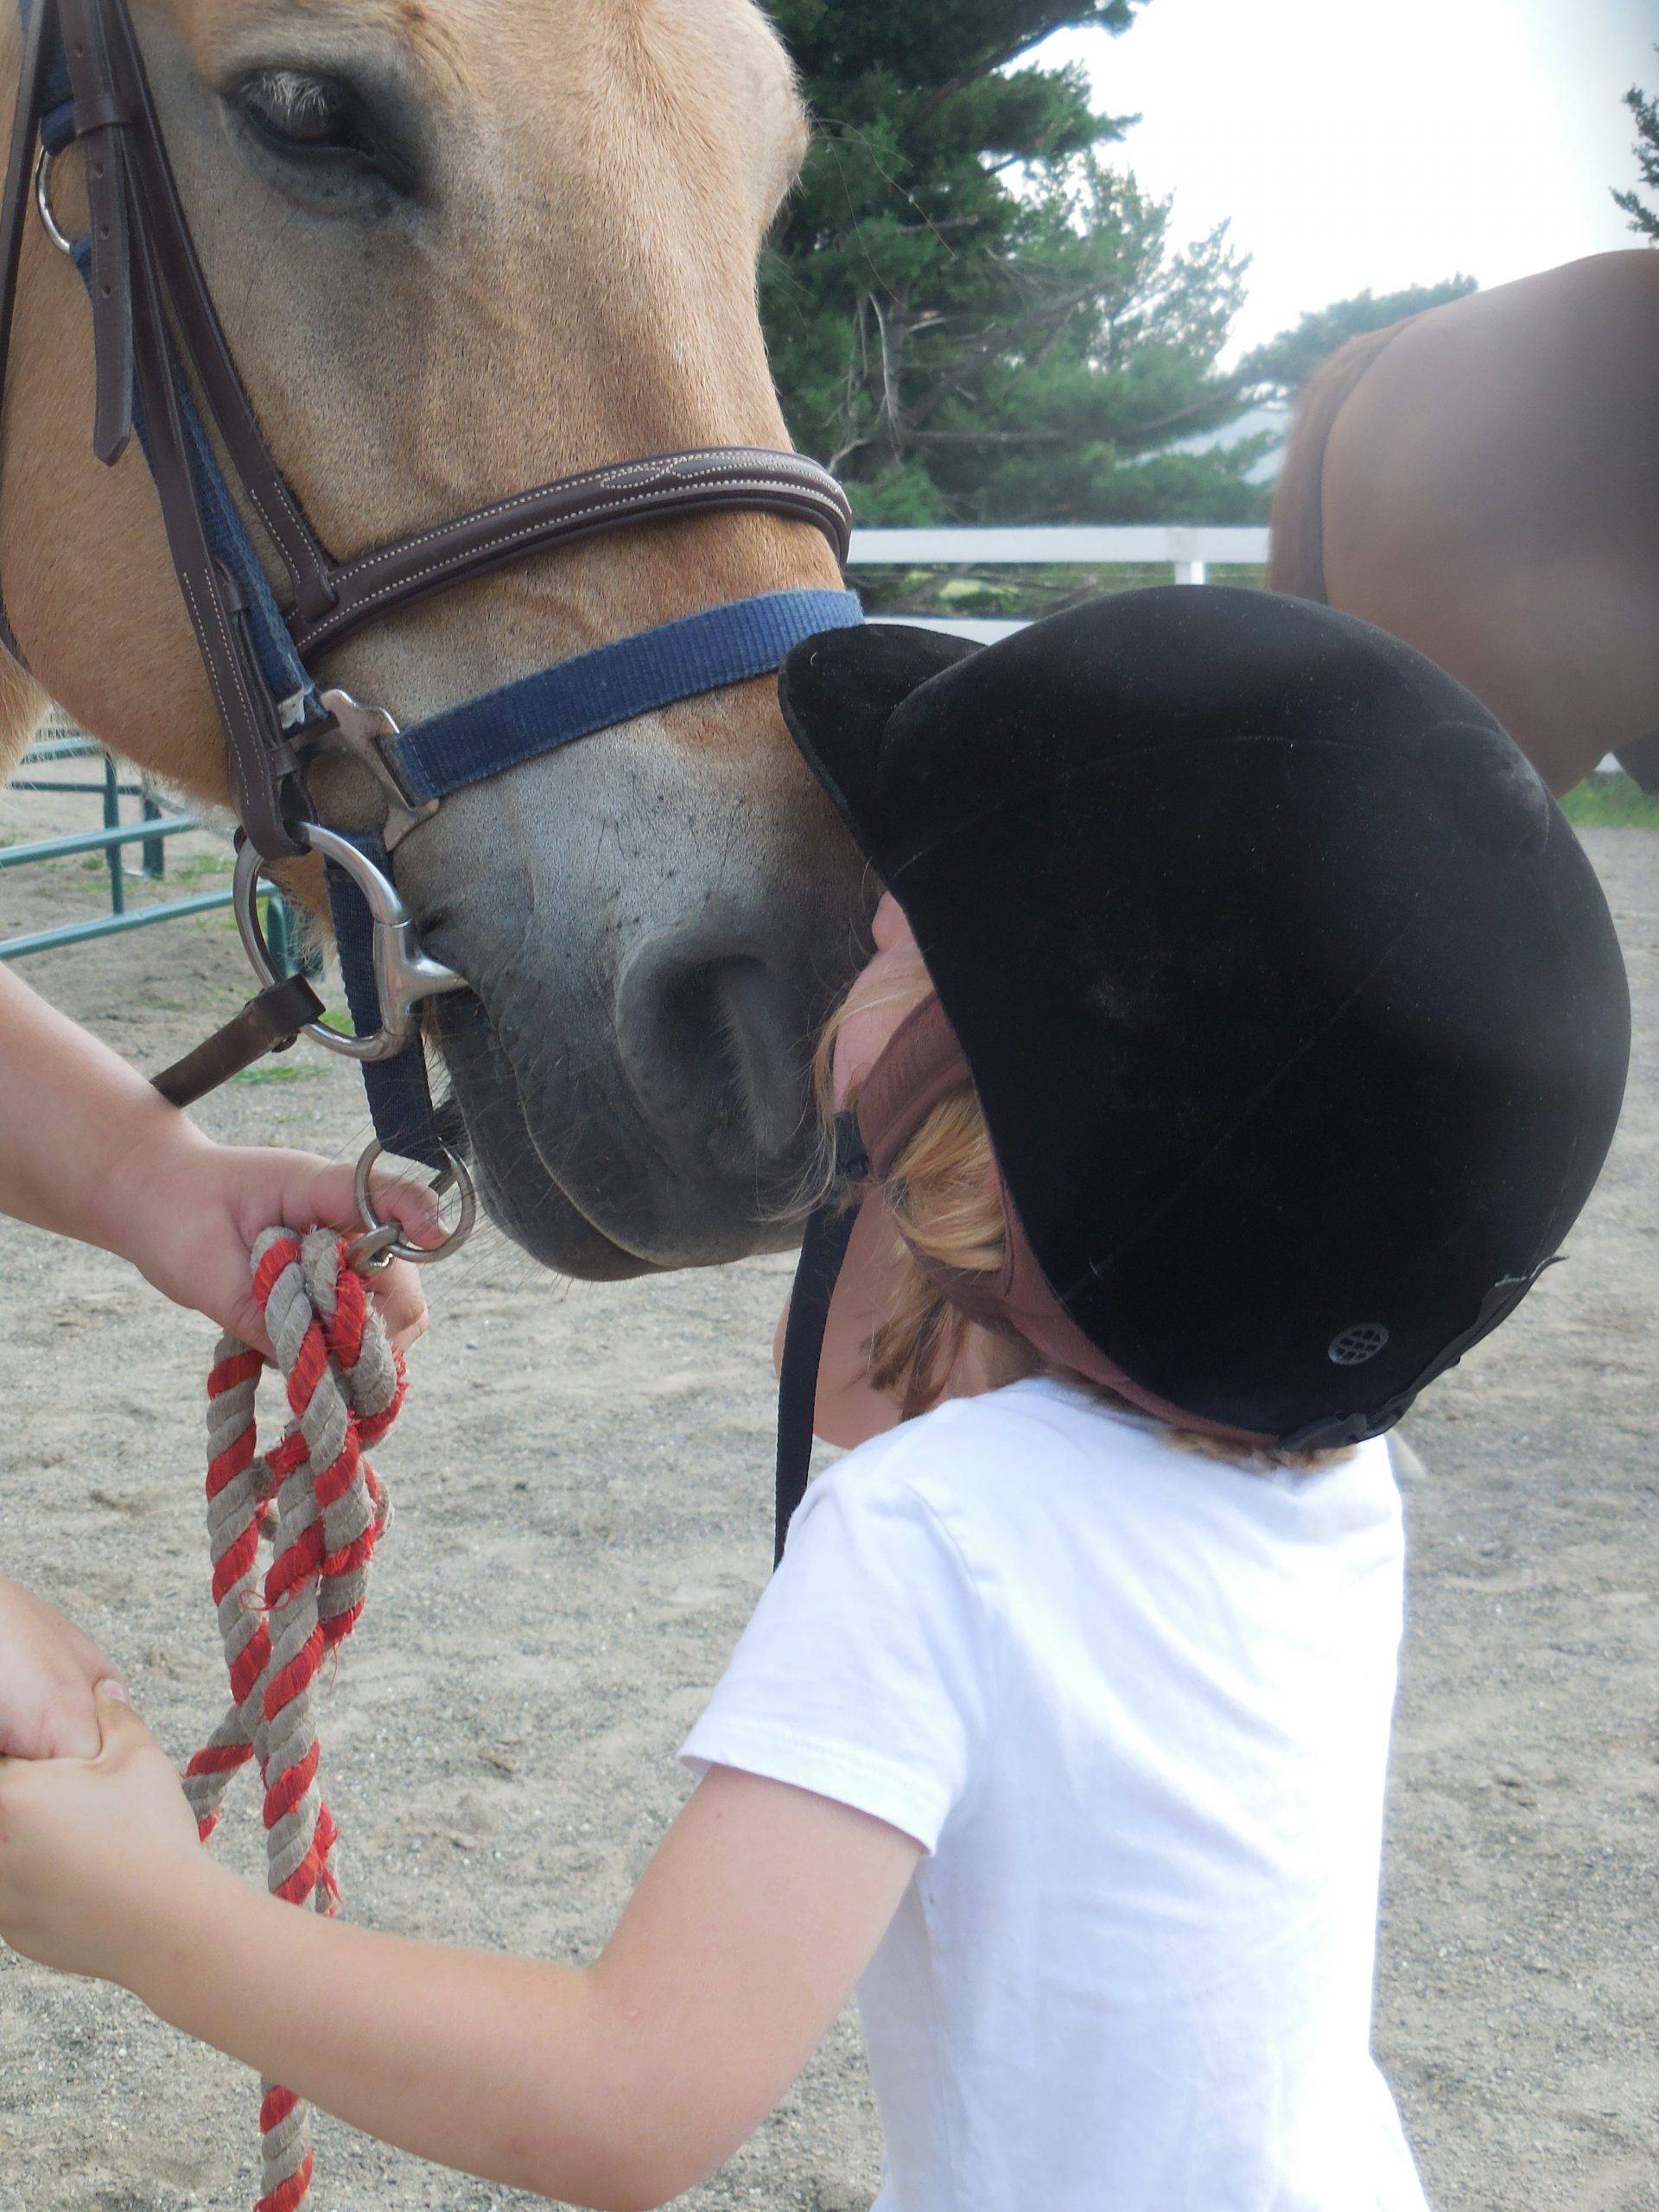 A close up of a young child with a black helmet on kissing the nose of a yellow horse with a bridle and red lead rope